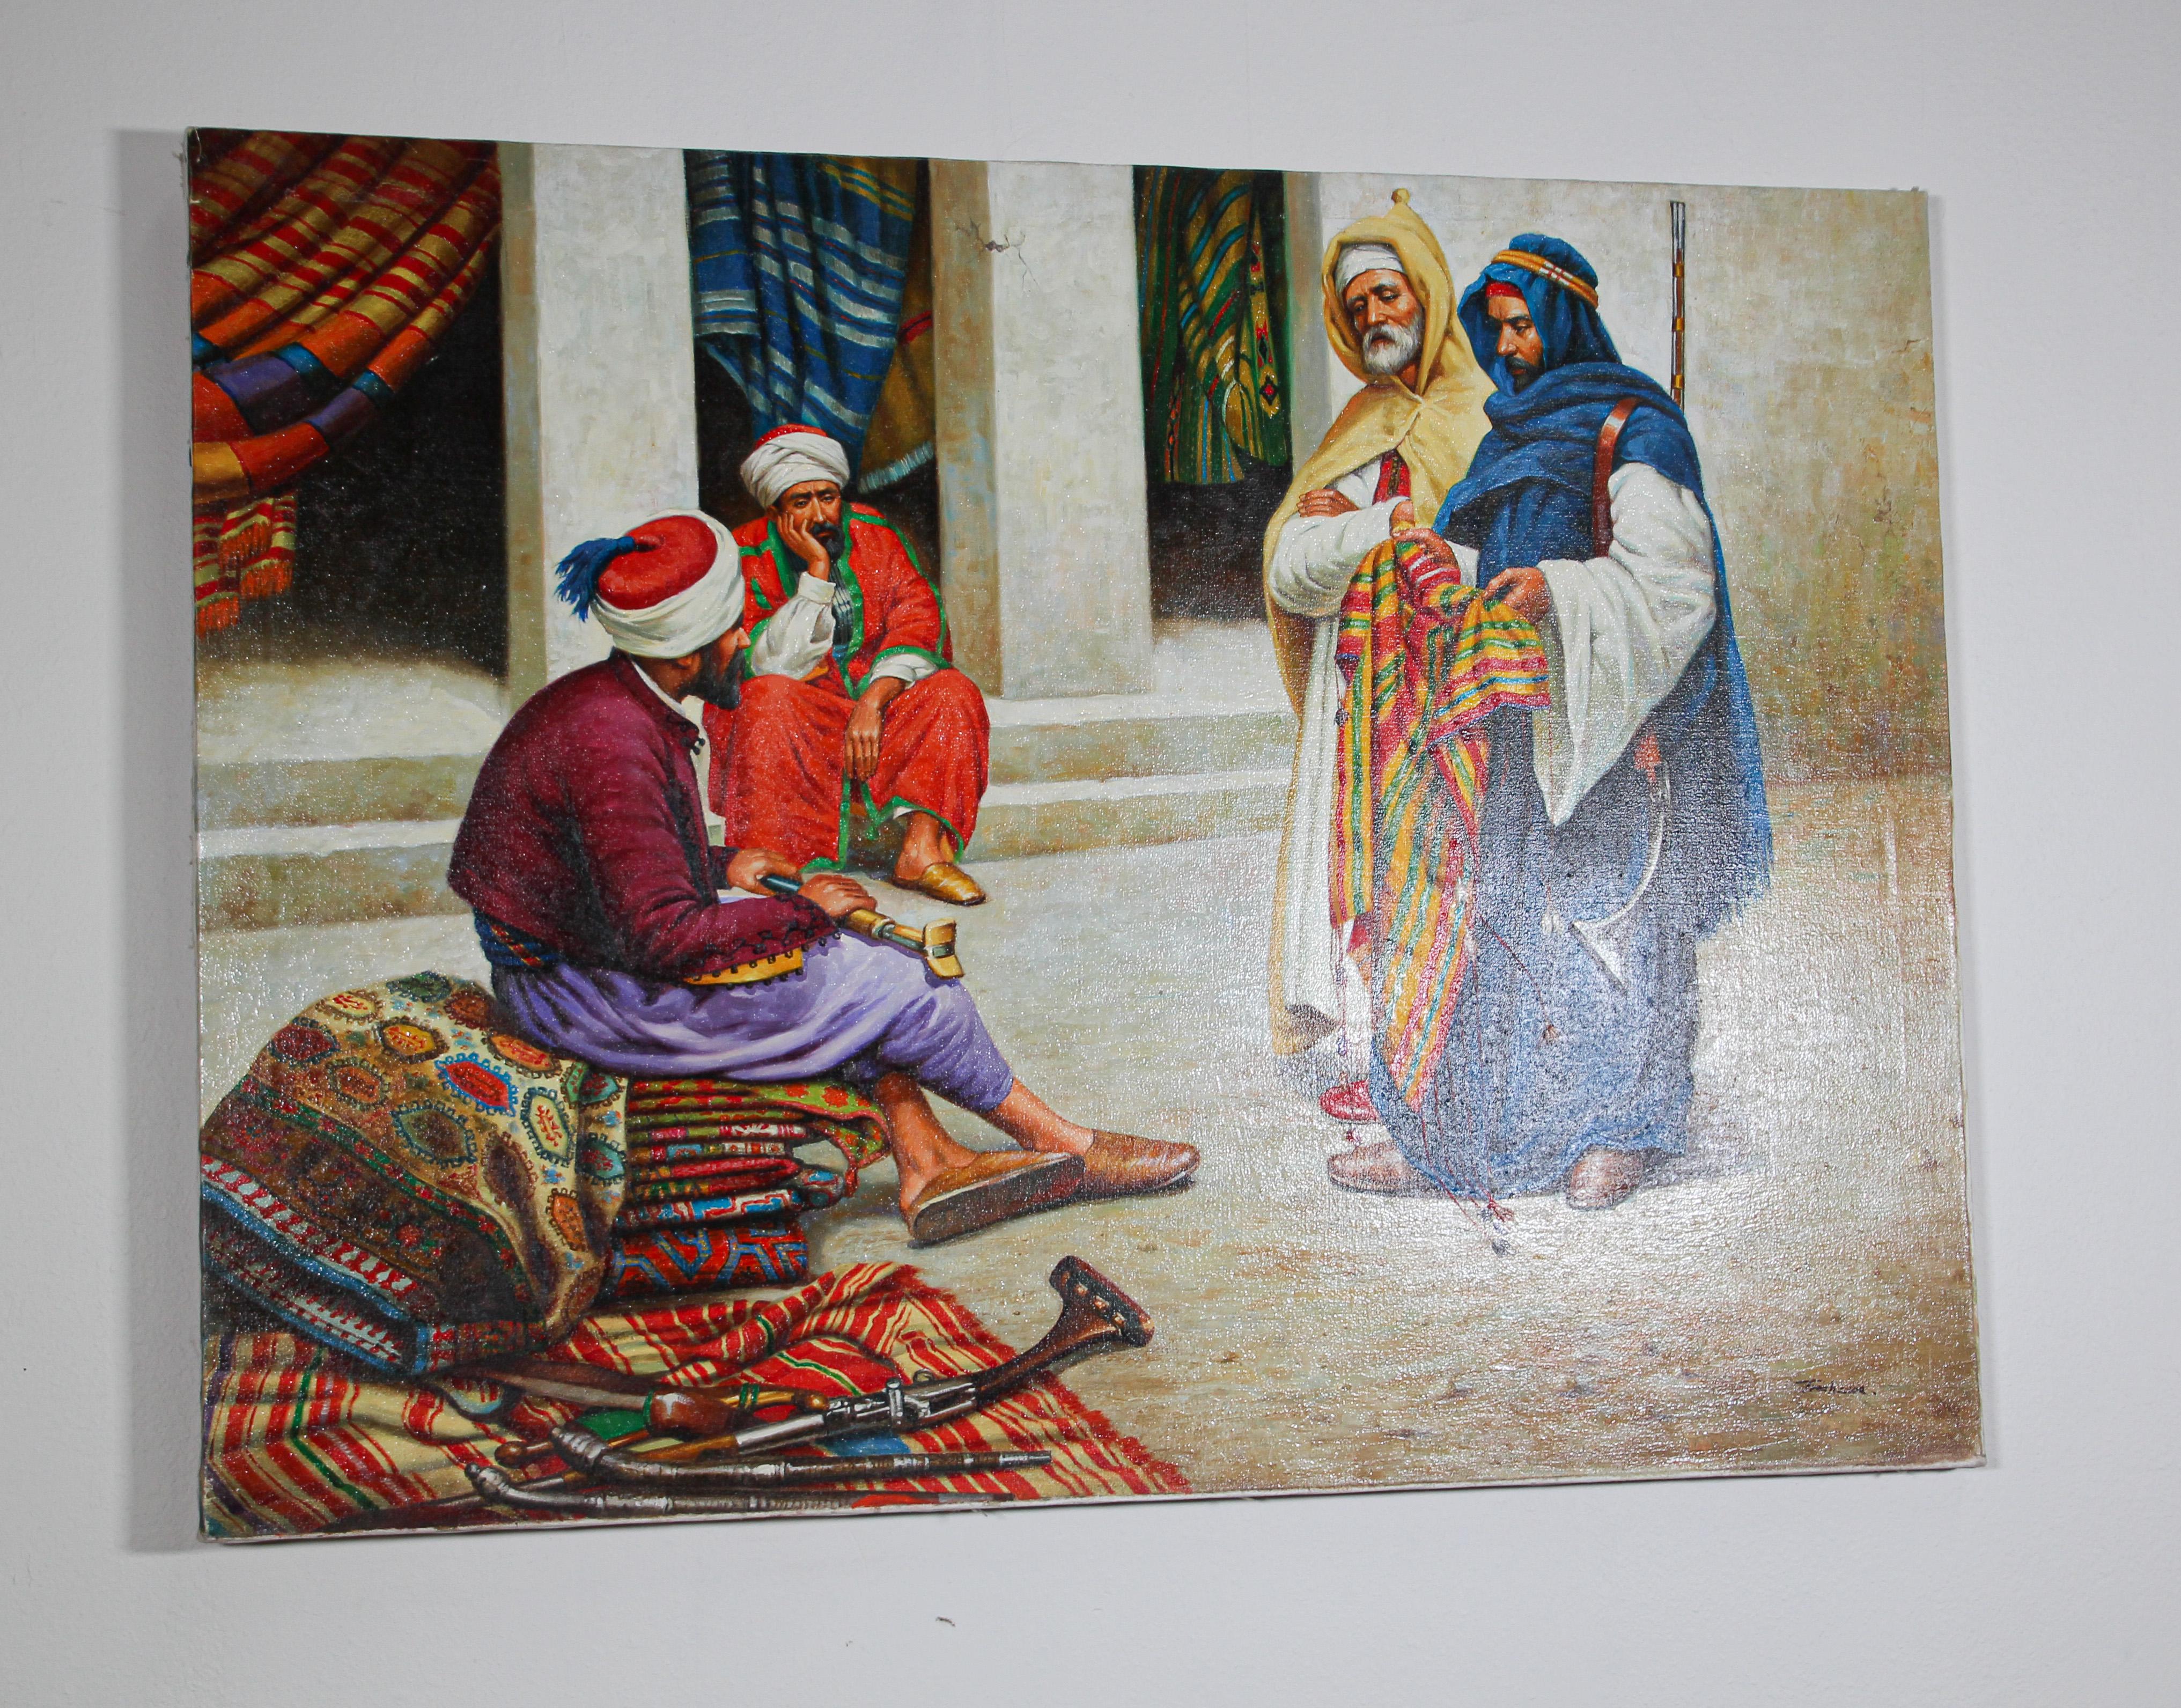 Moroccan orientalist oil on canvas painting of a 19th century Moroccan rug market scene with an sellers seating on a pile of carpet and two other men wearing traditional colorful robes standing and checking the goods.
The background depict an old